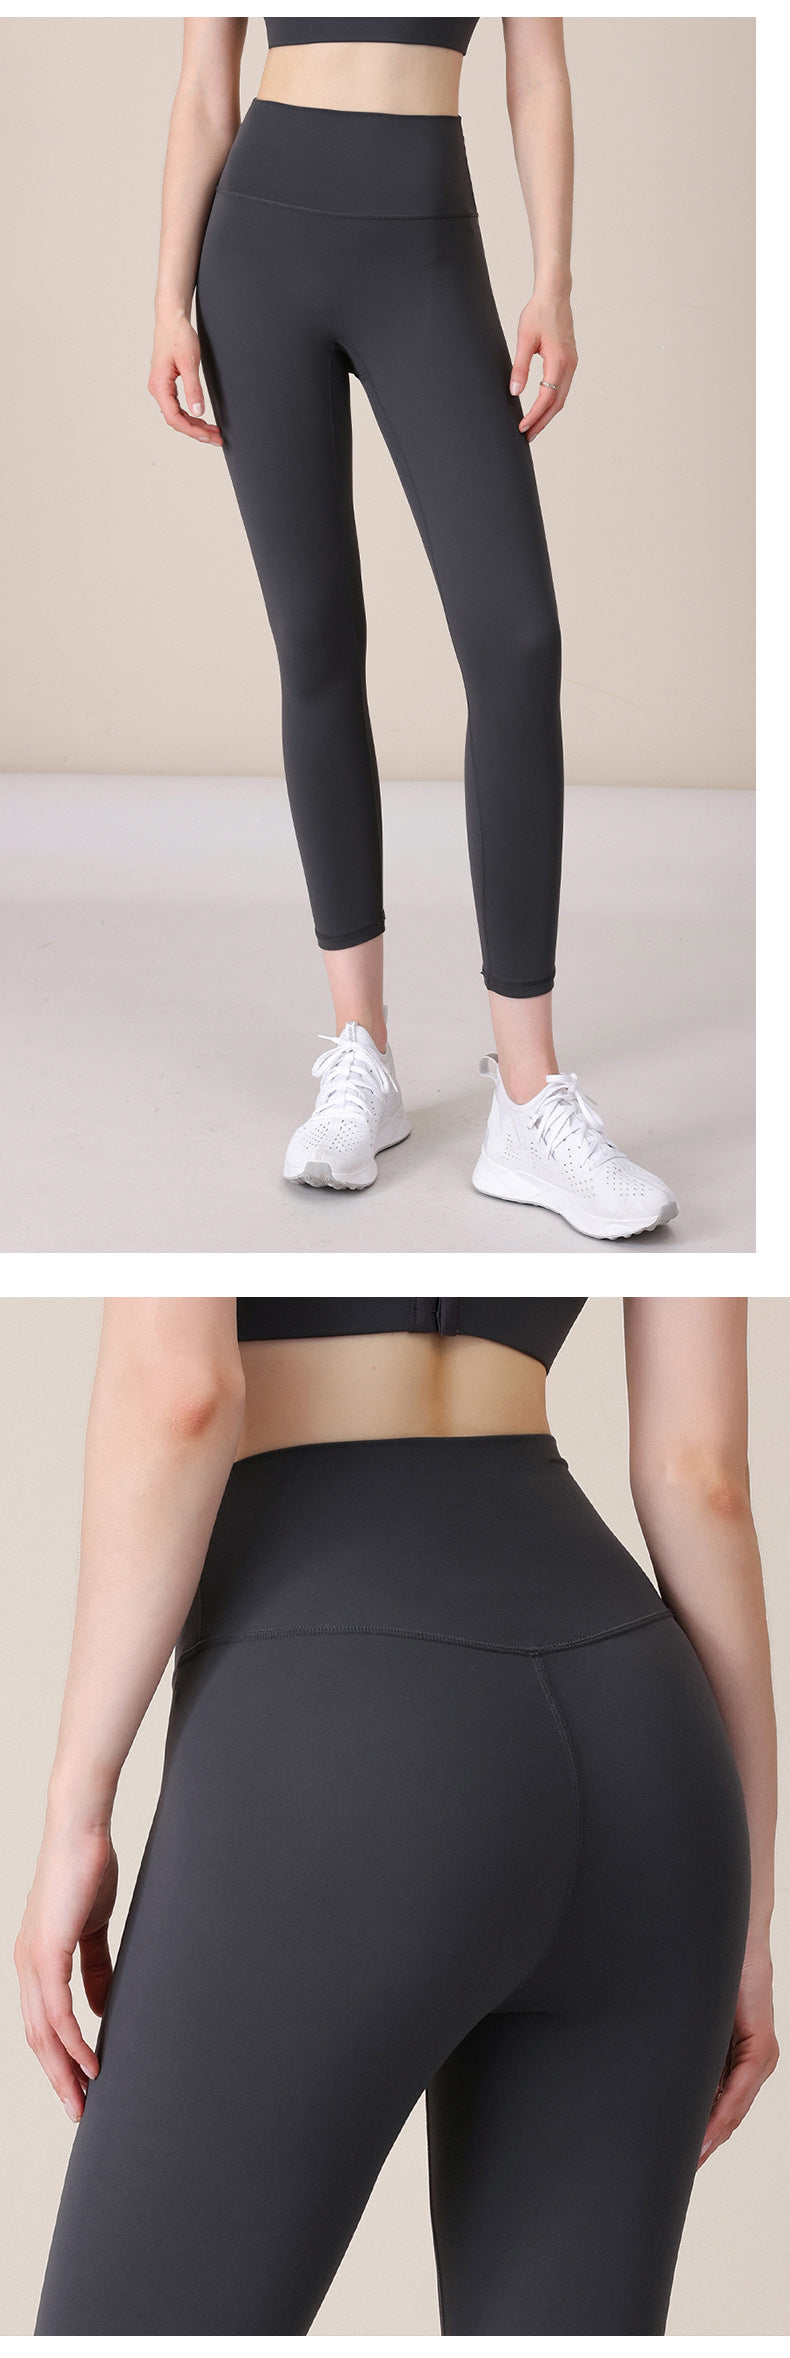 2023.09 New size-free nude yoga pants for women, tight-fitting butt-lifting peach pants, sports fitness pants, belly-controlling, three-point sports pants